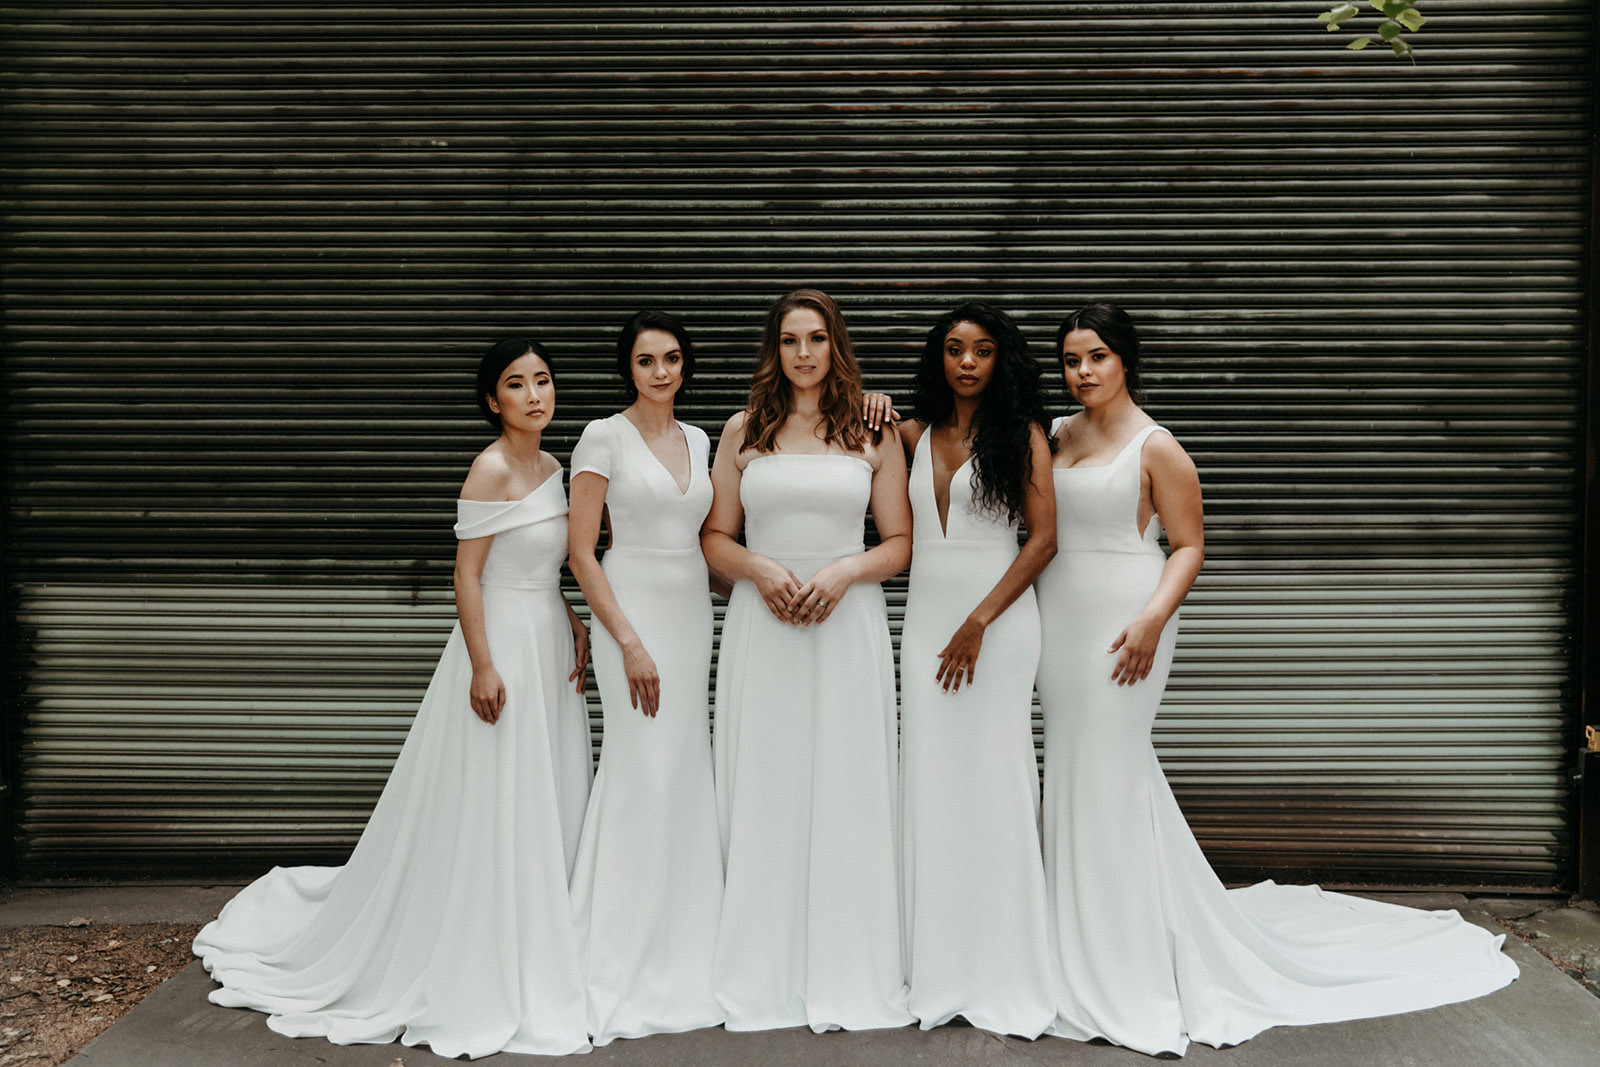 How to Style a Cohesive Bridal Look